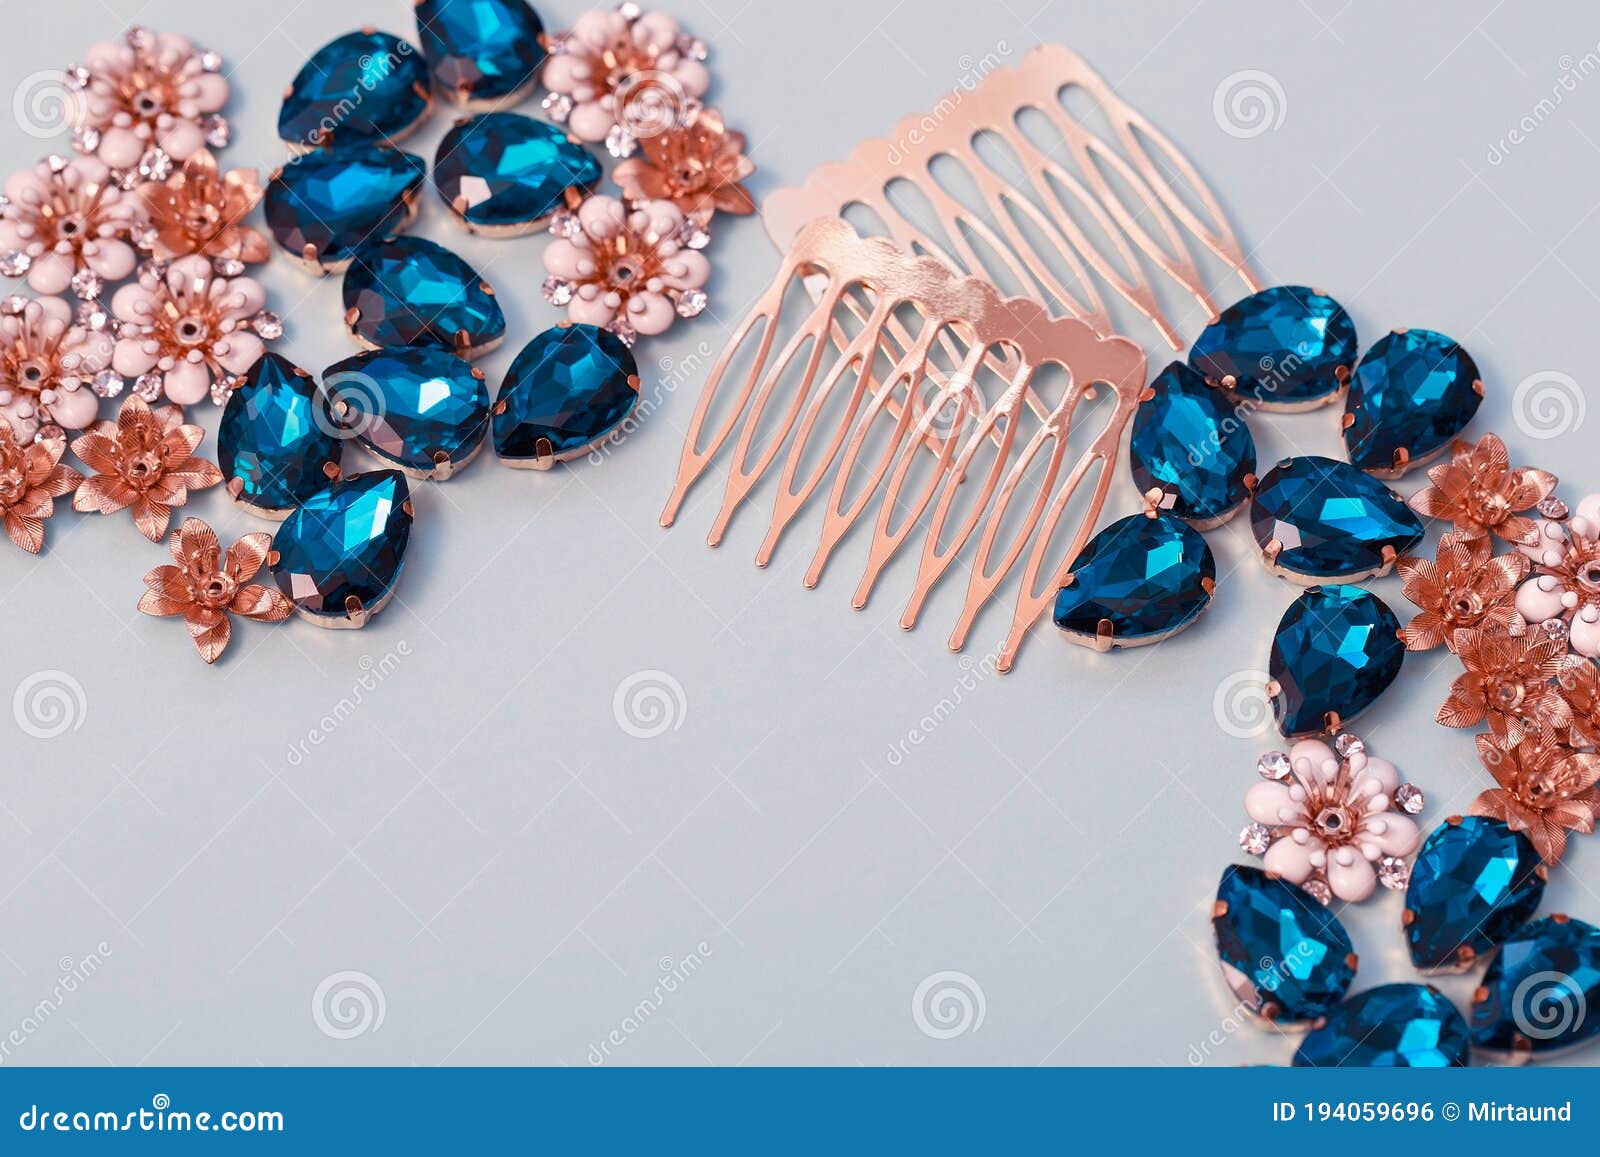 Materials for Creating Jewelry. Navy Blue Rhinestones, Hair Combs